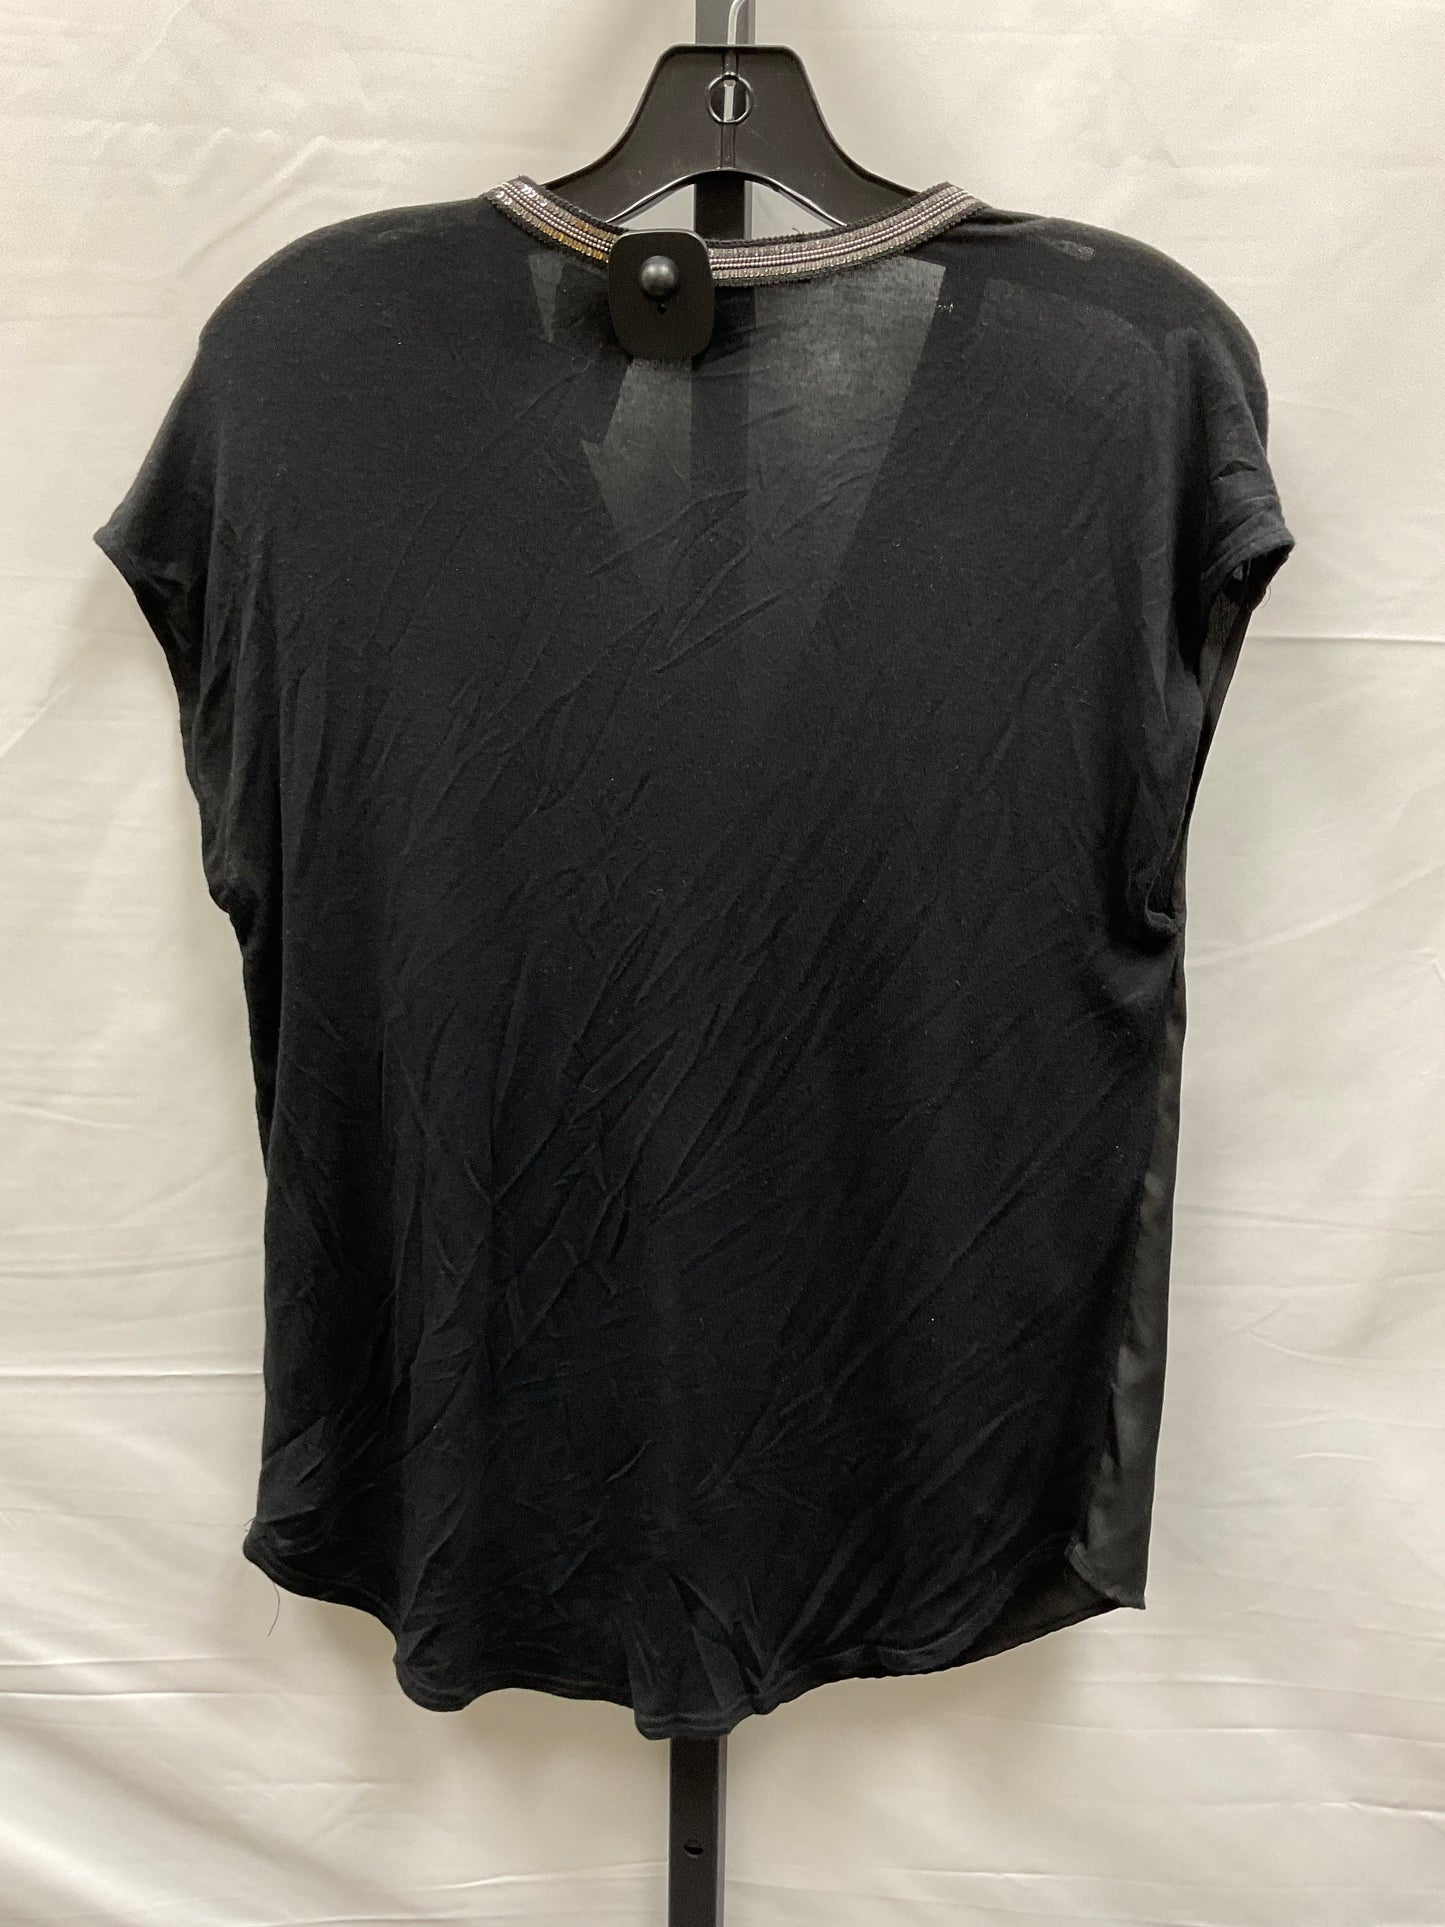 Black Top Short Sleeve Rock And Republic, Size Xs